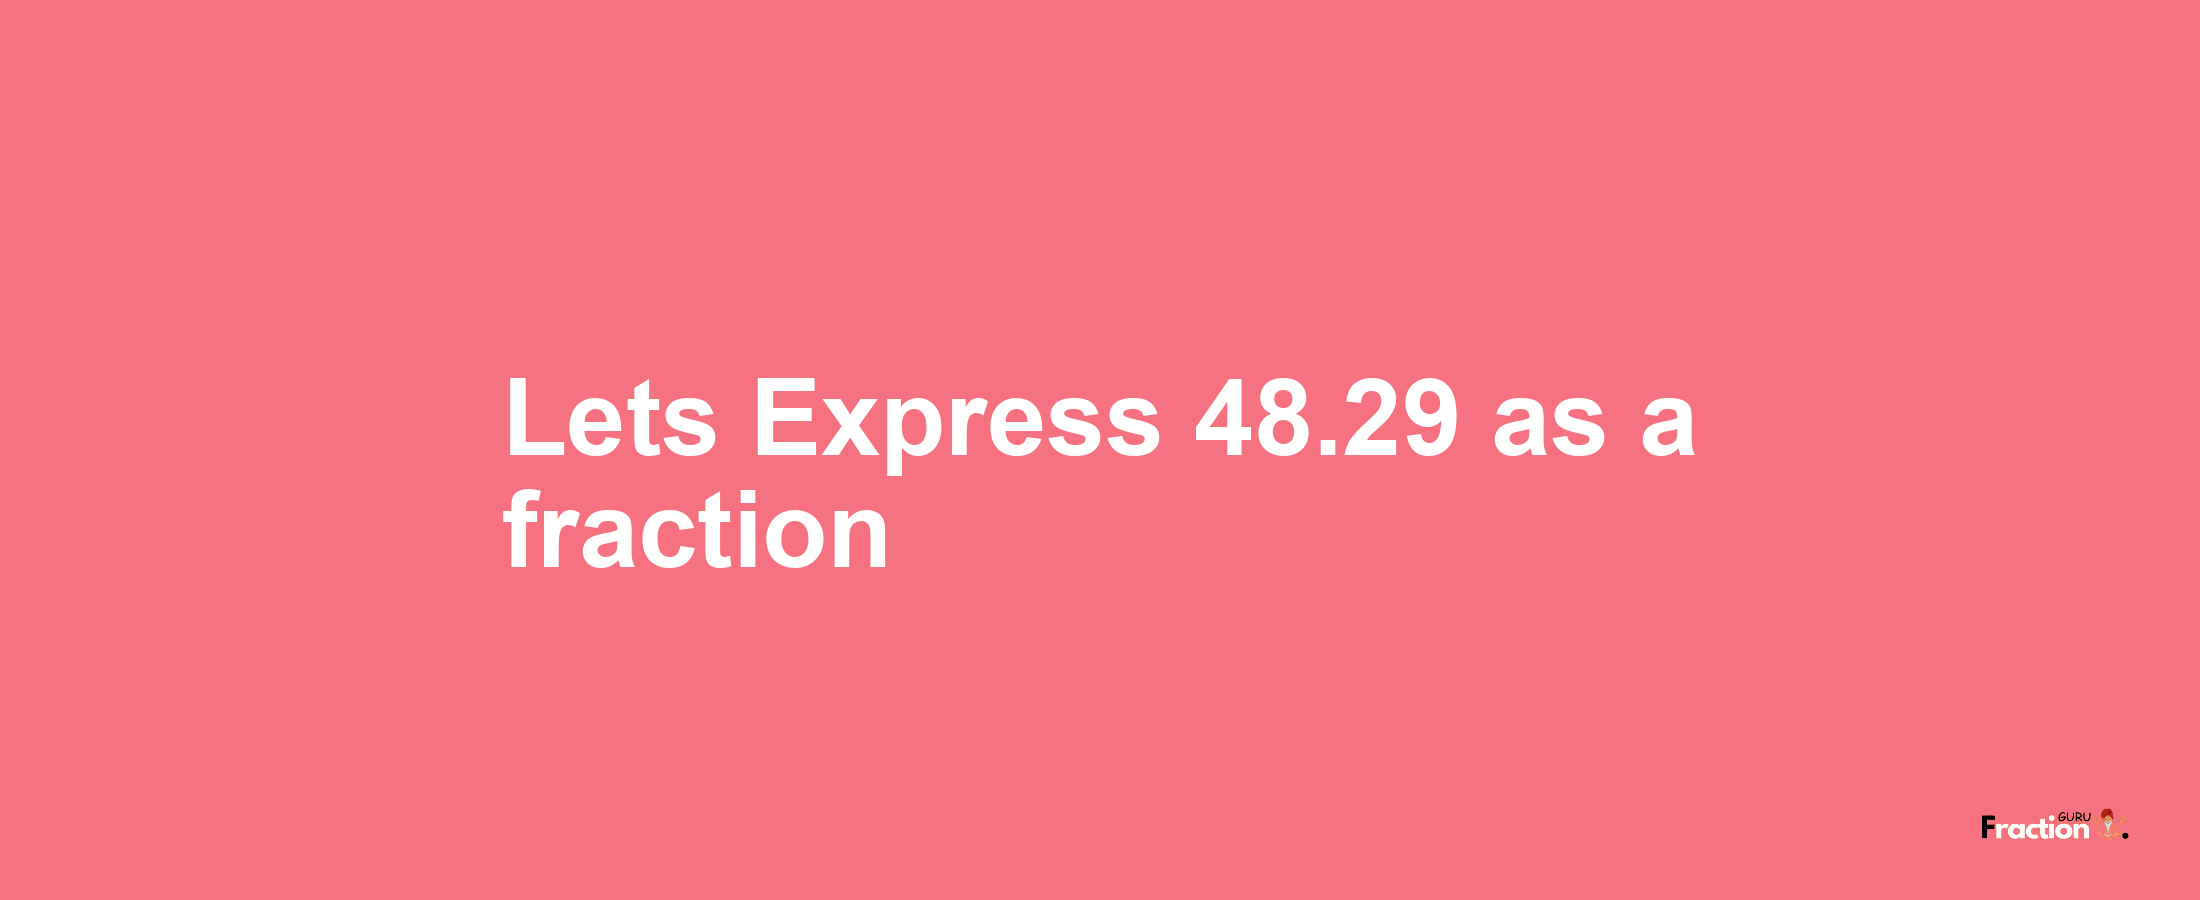 Lets Express 48.29 as afraction